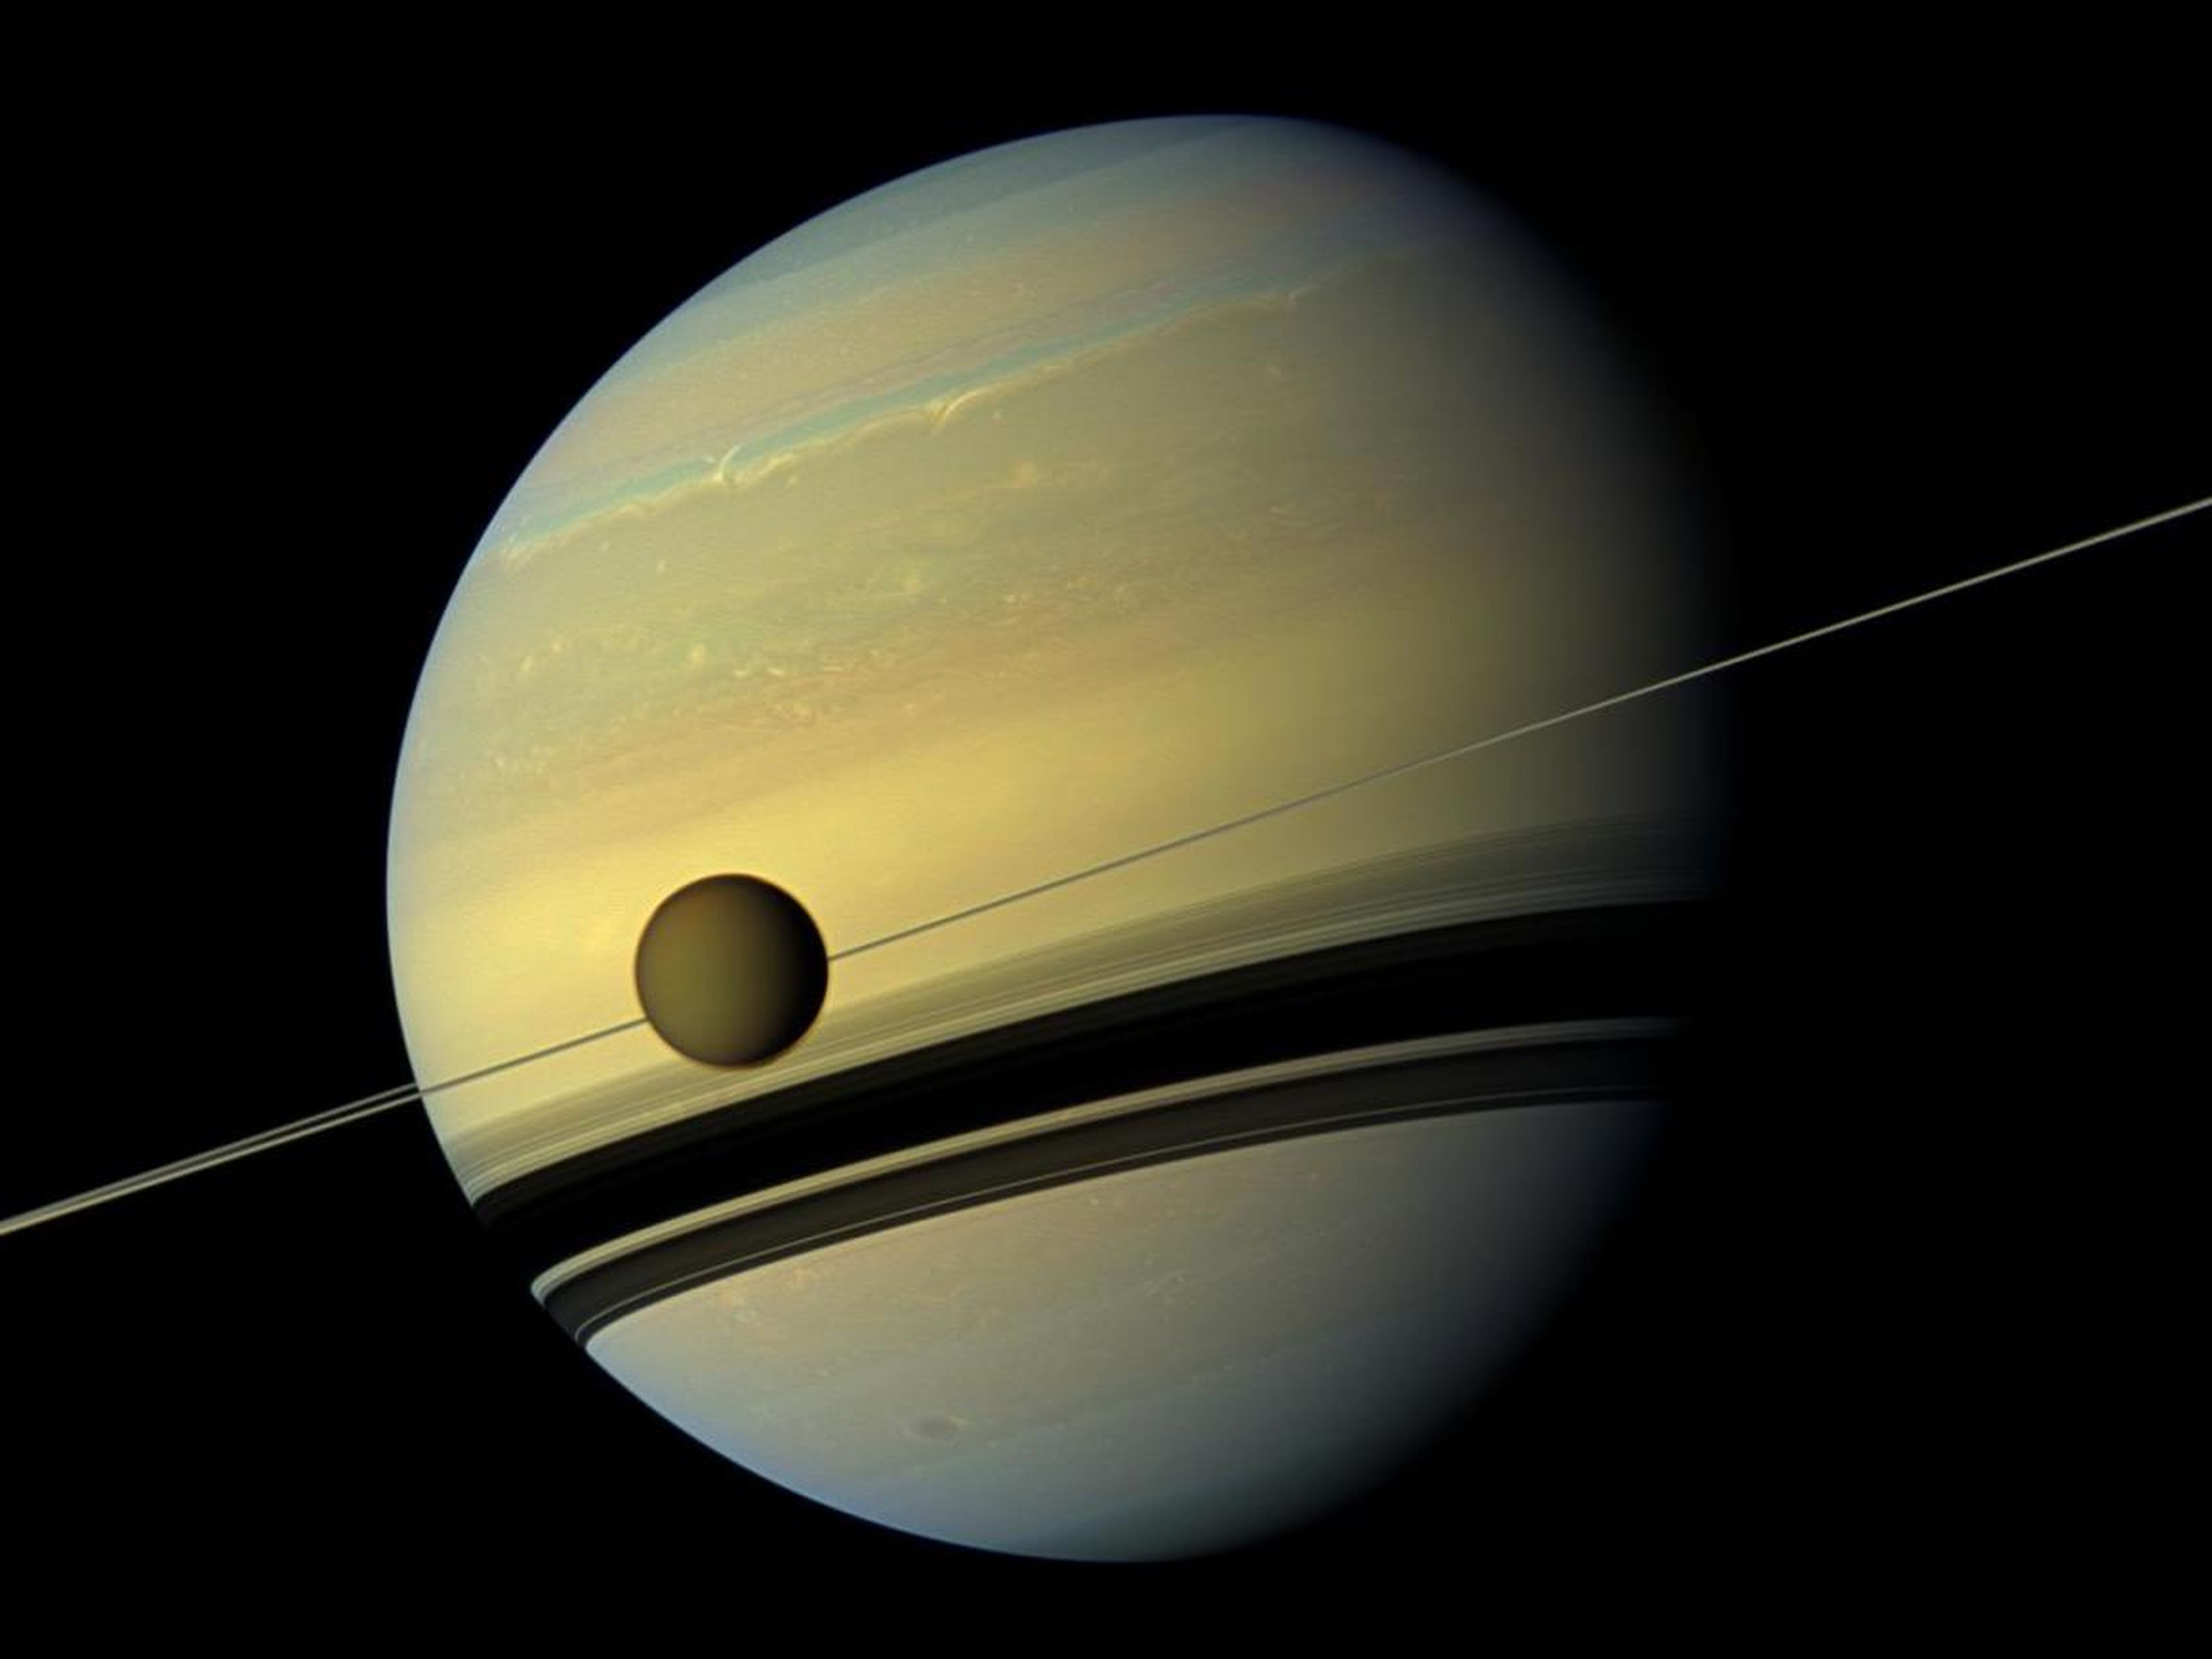 Saturn's largest moon, Titan, passes the planet undergoing seasonal changes in this natural color view from NASA's Cassini spacecraft.